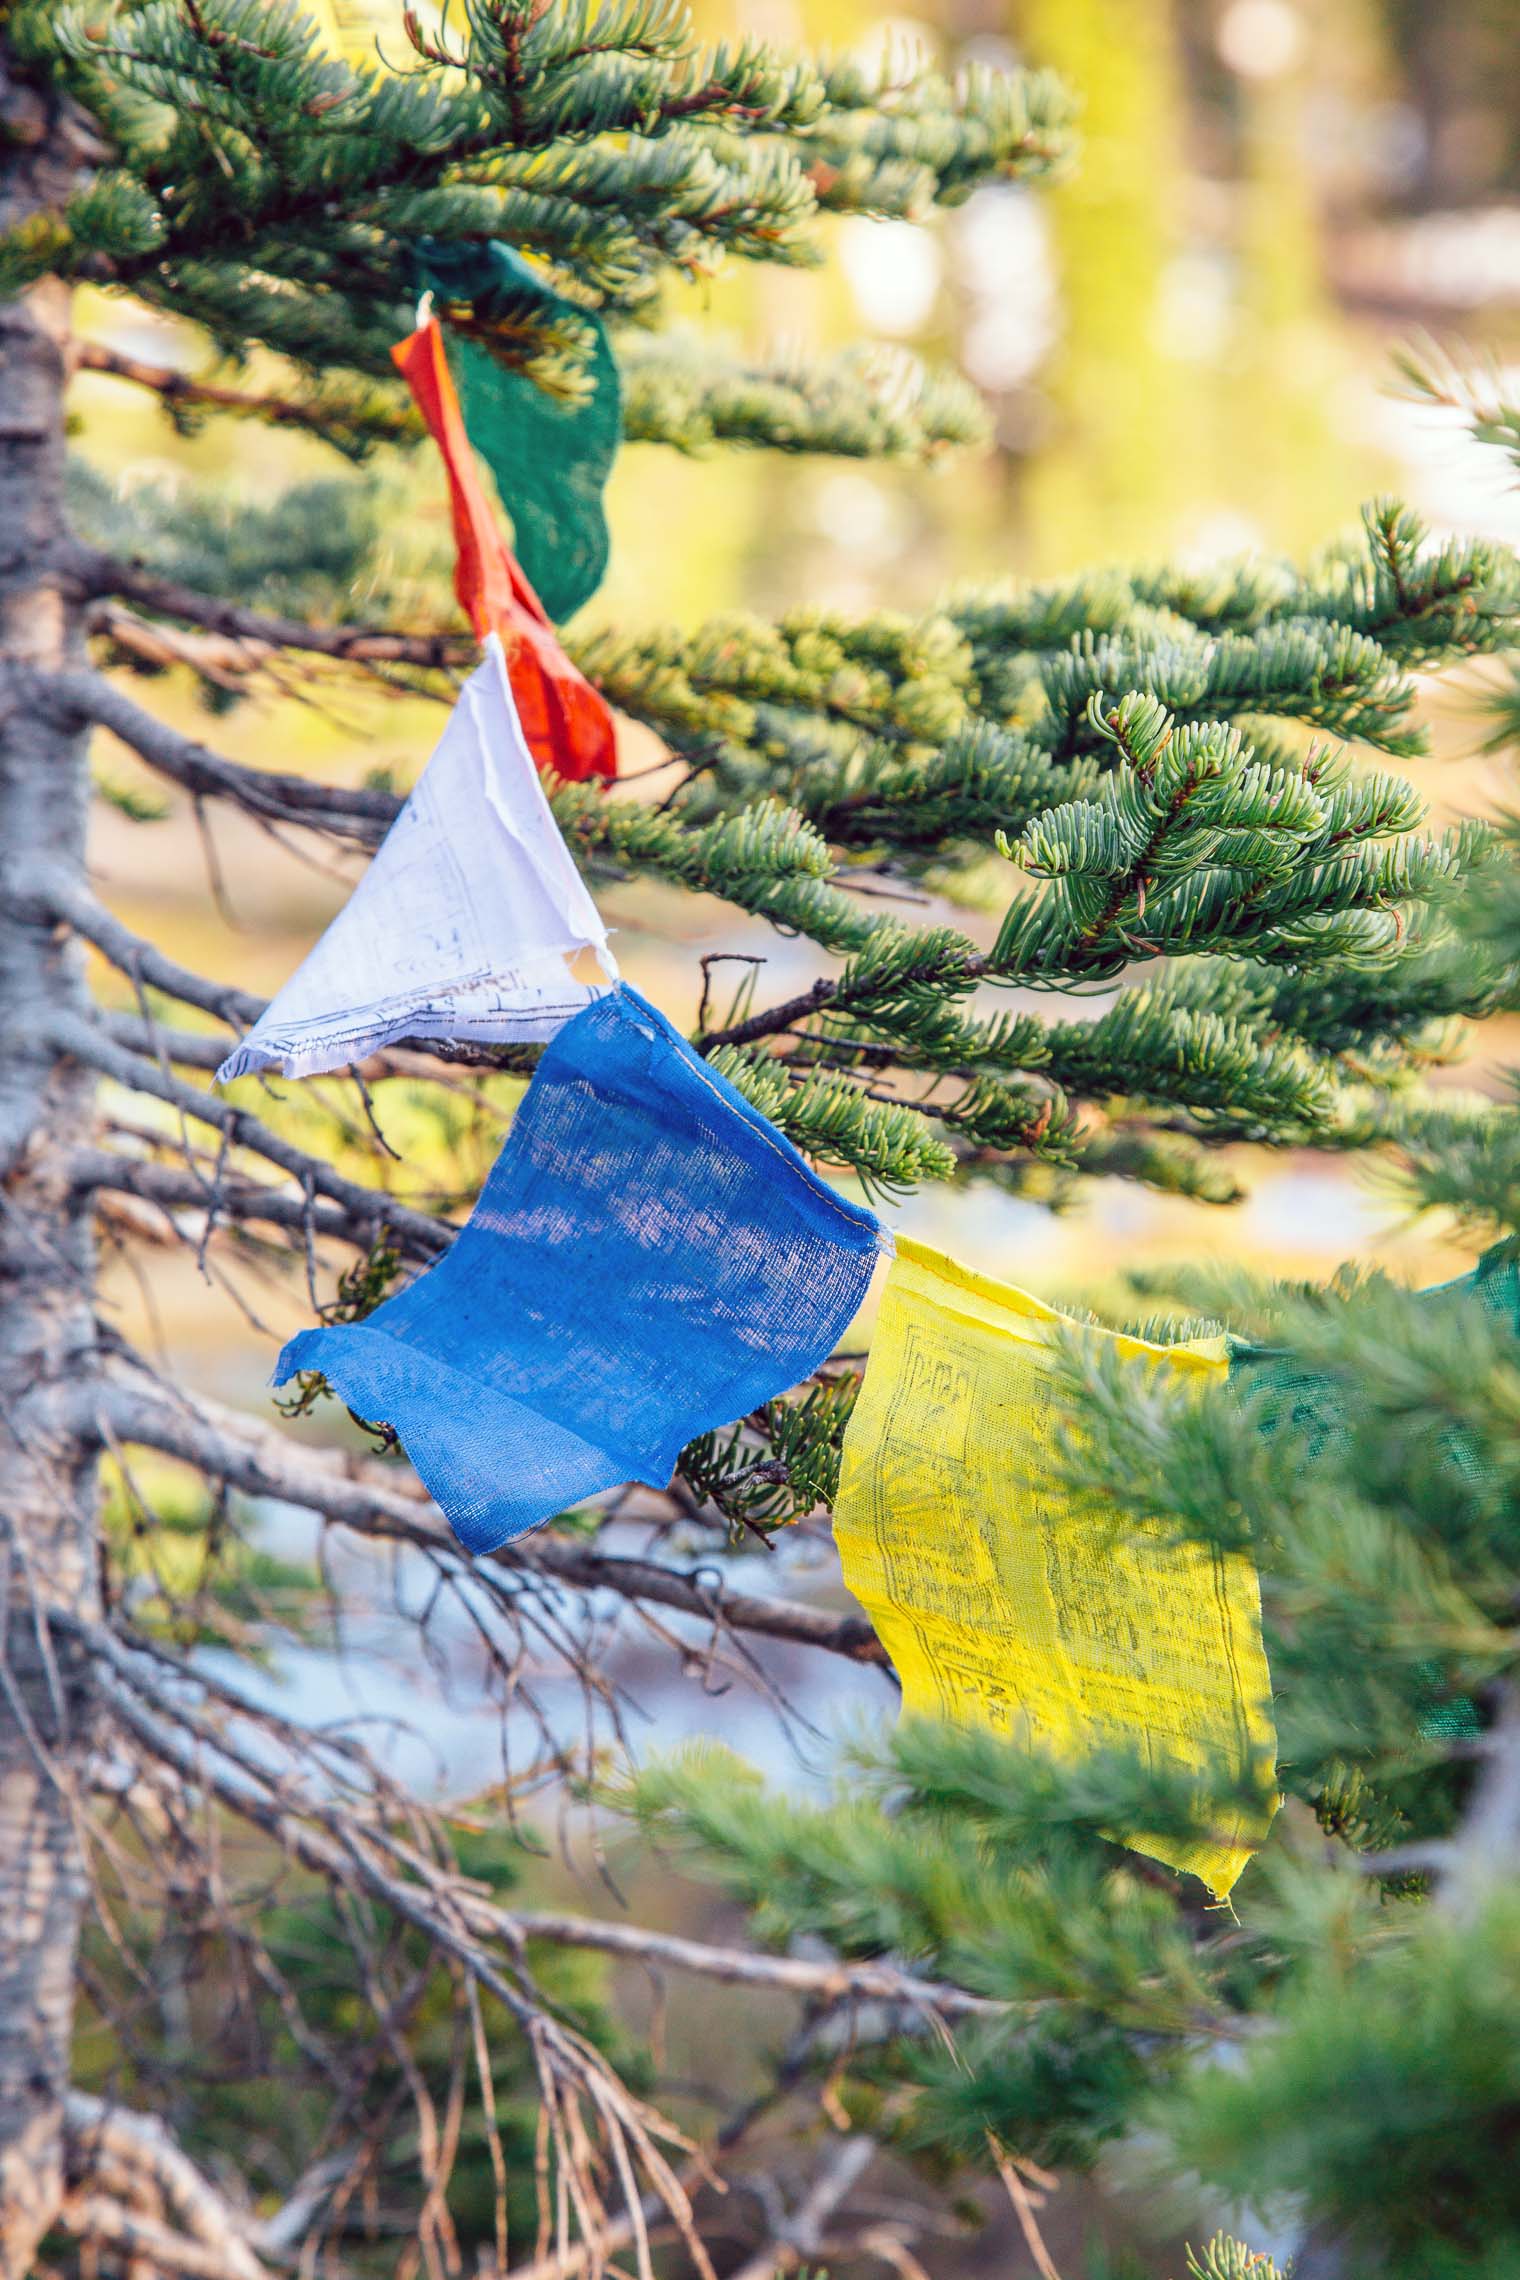 Colorful prayer flags hung in Pine trees